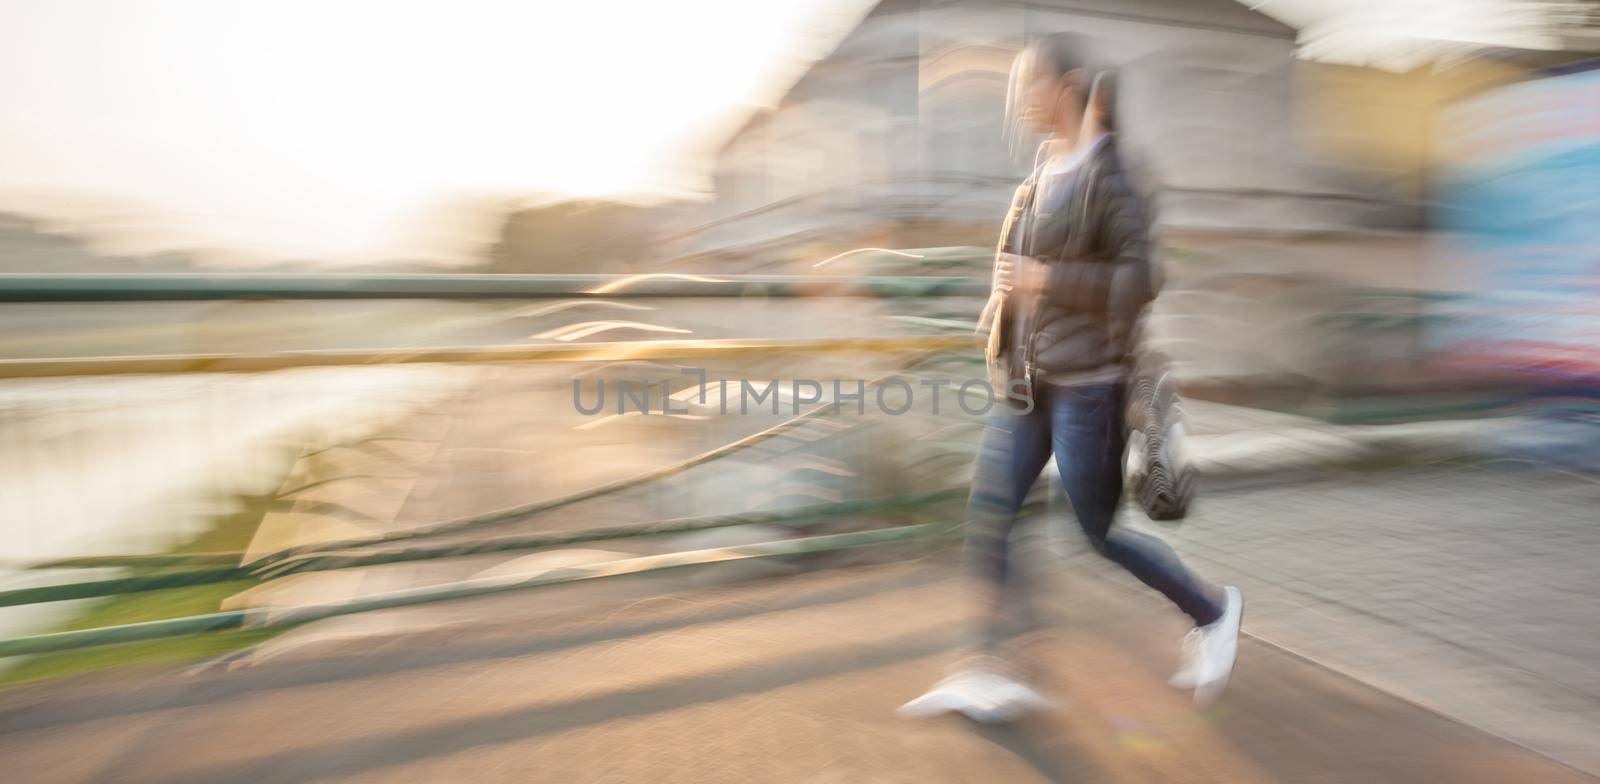 Abstract image of a woman walking down the street. Intentional motion blur